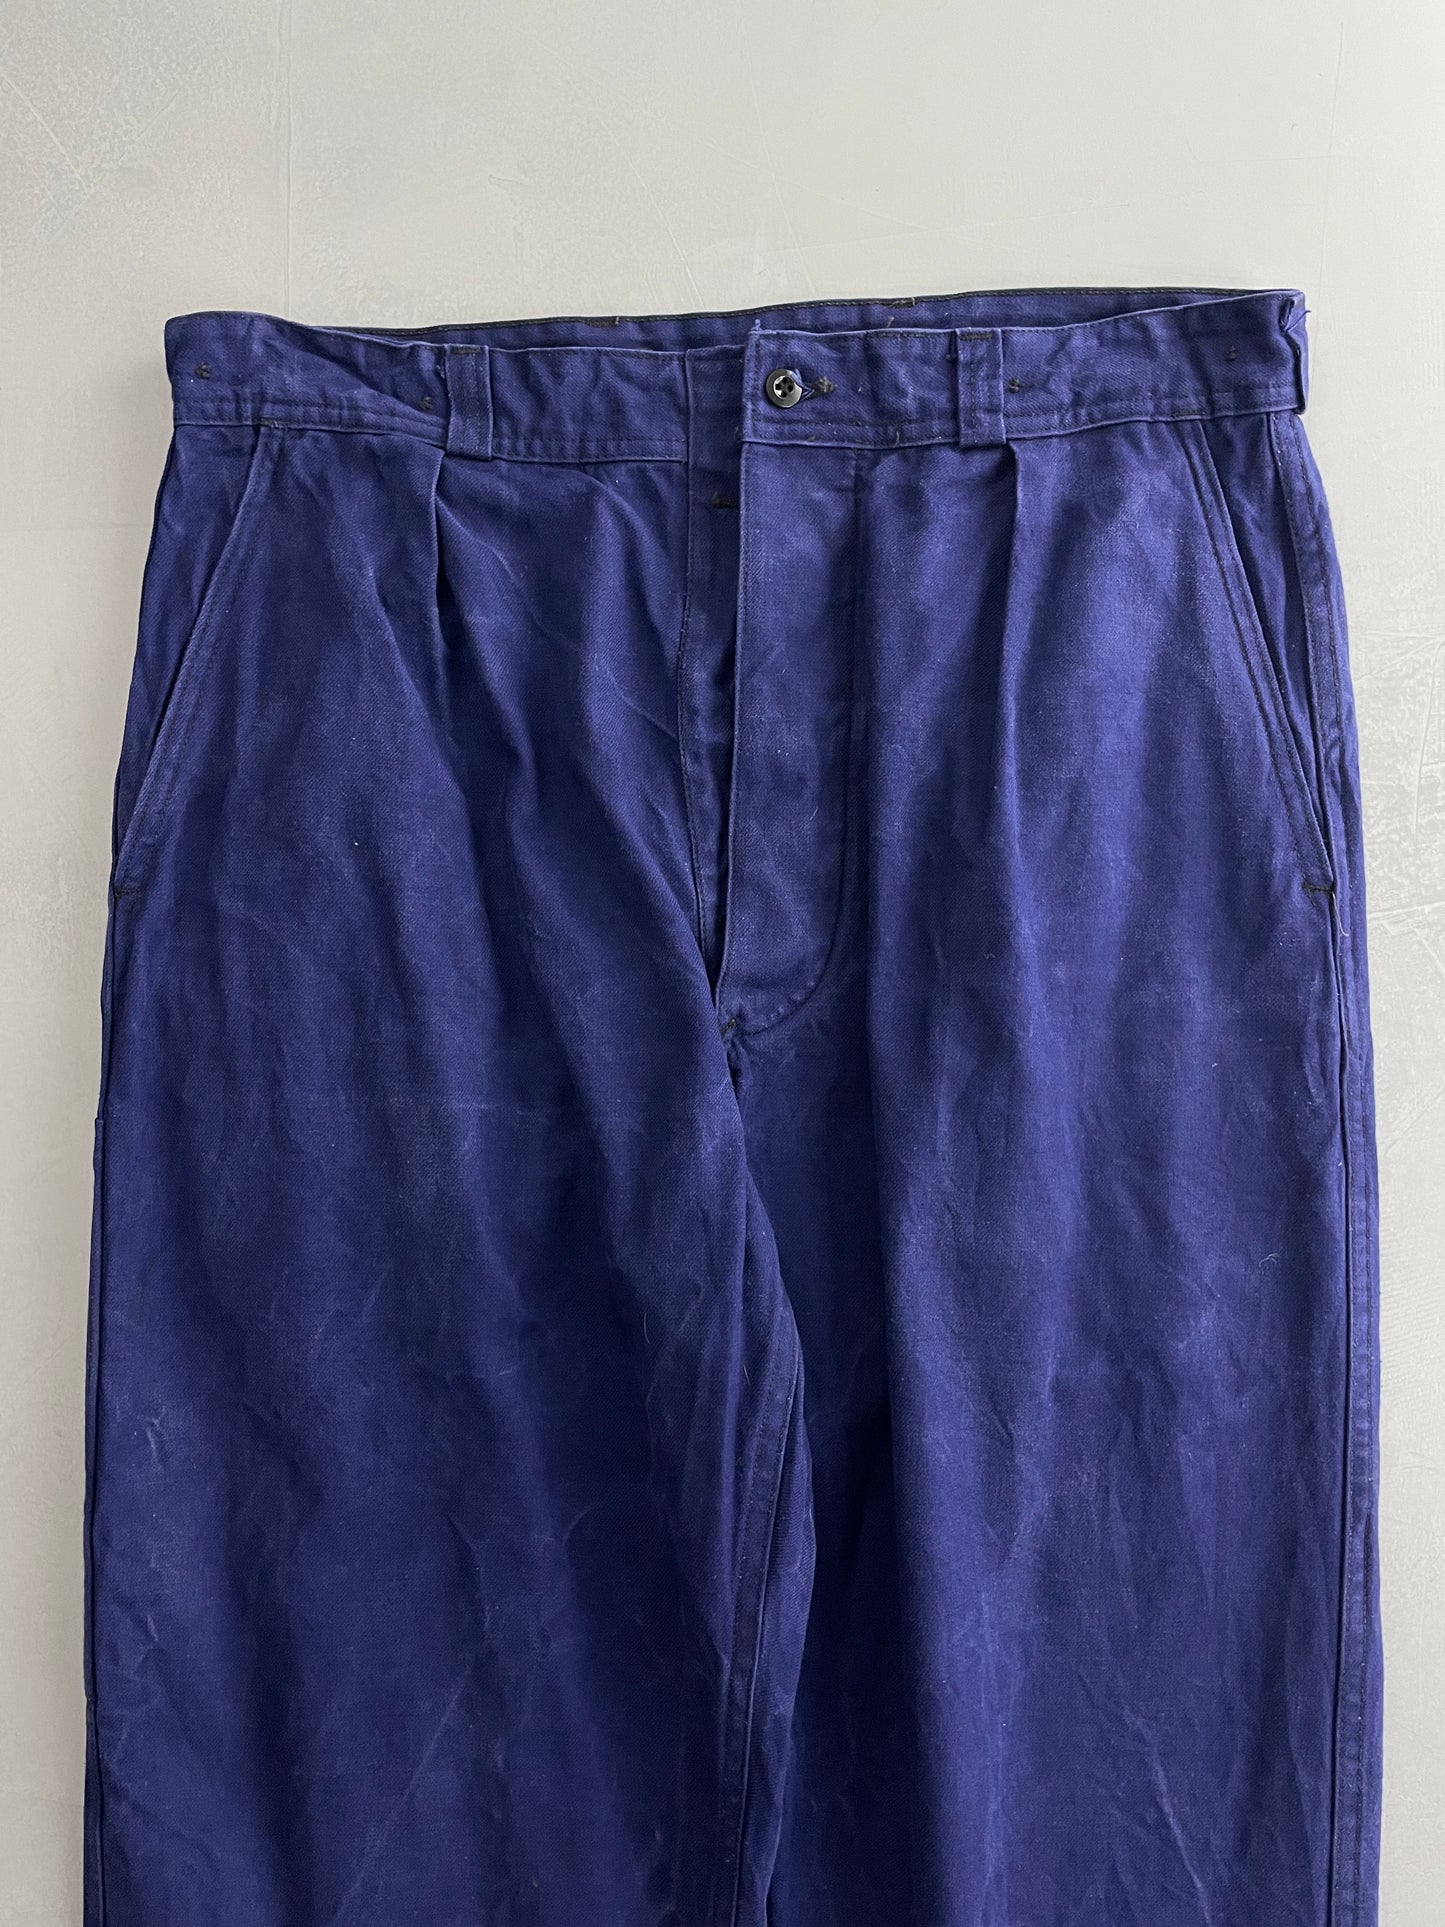 French St. James Workwear Pants [33"]